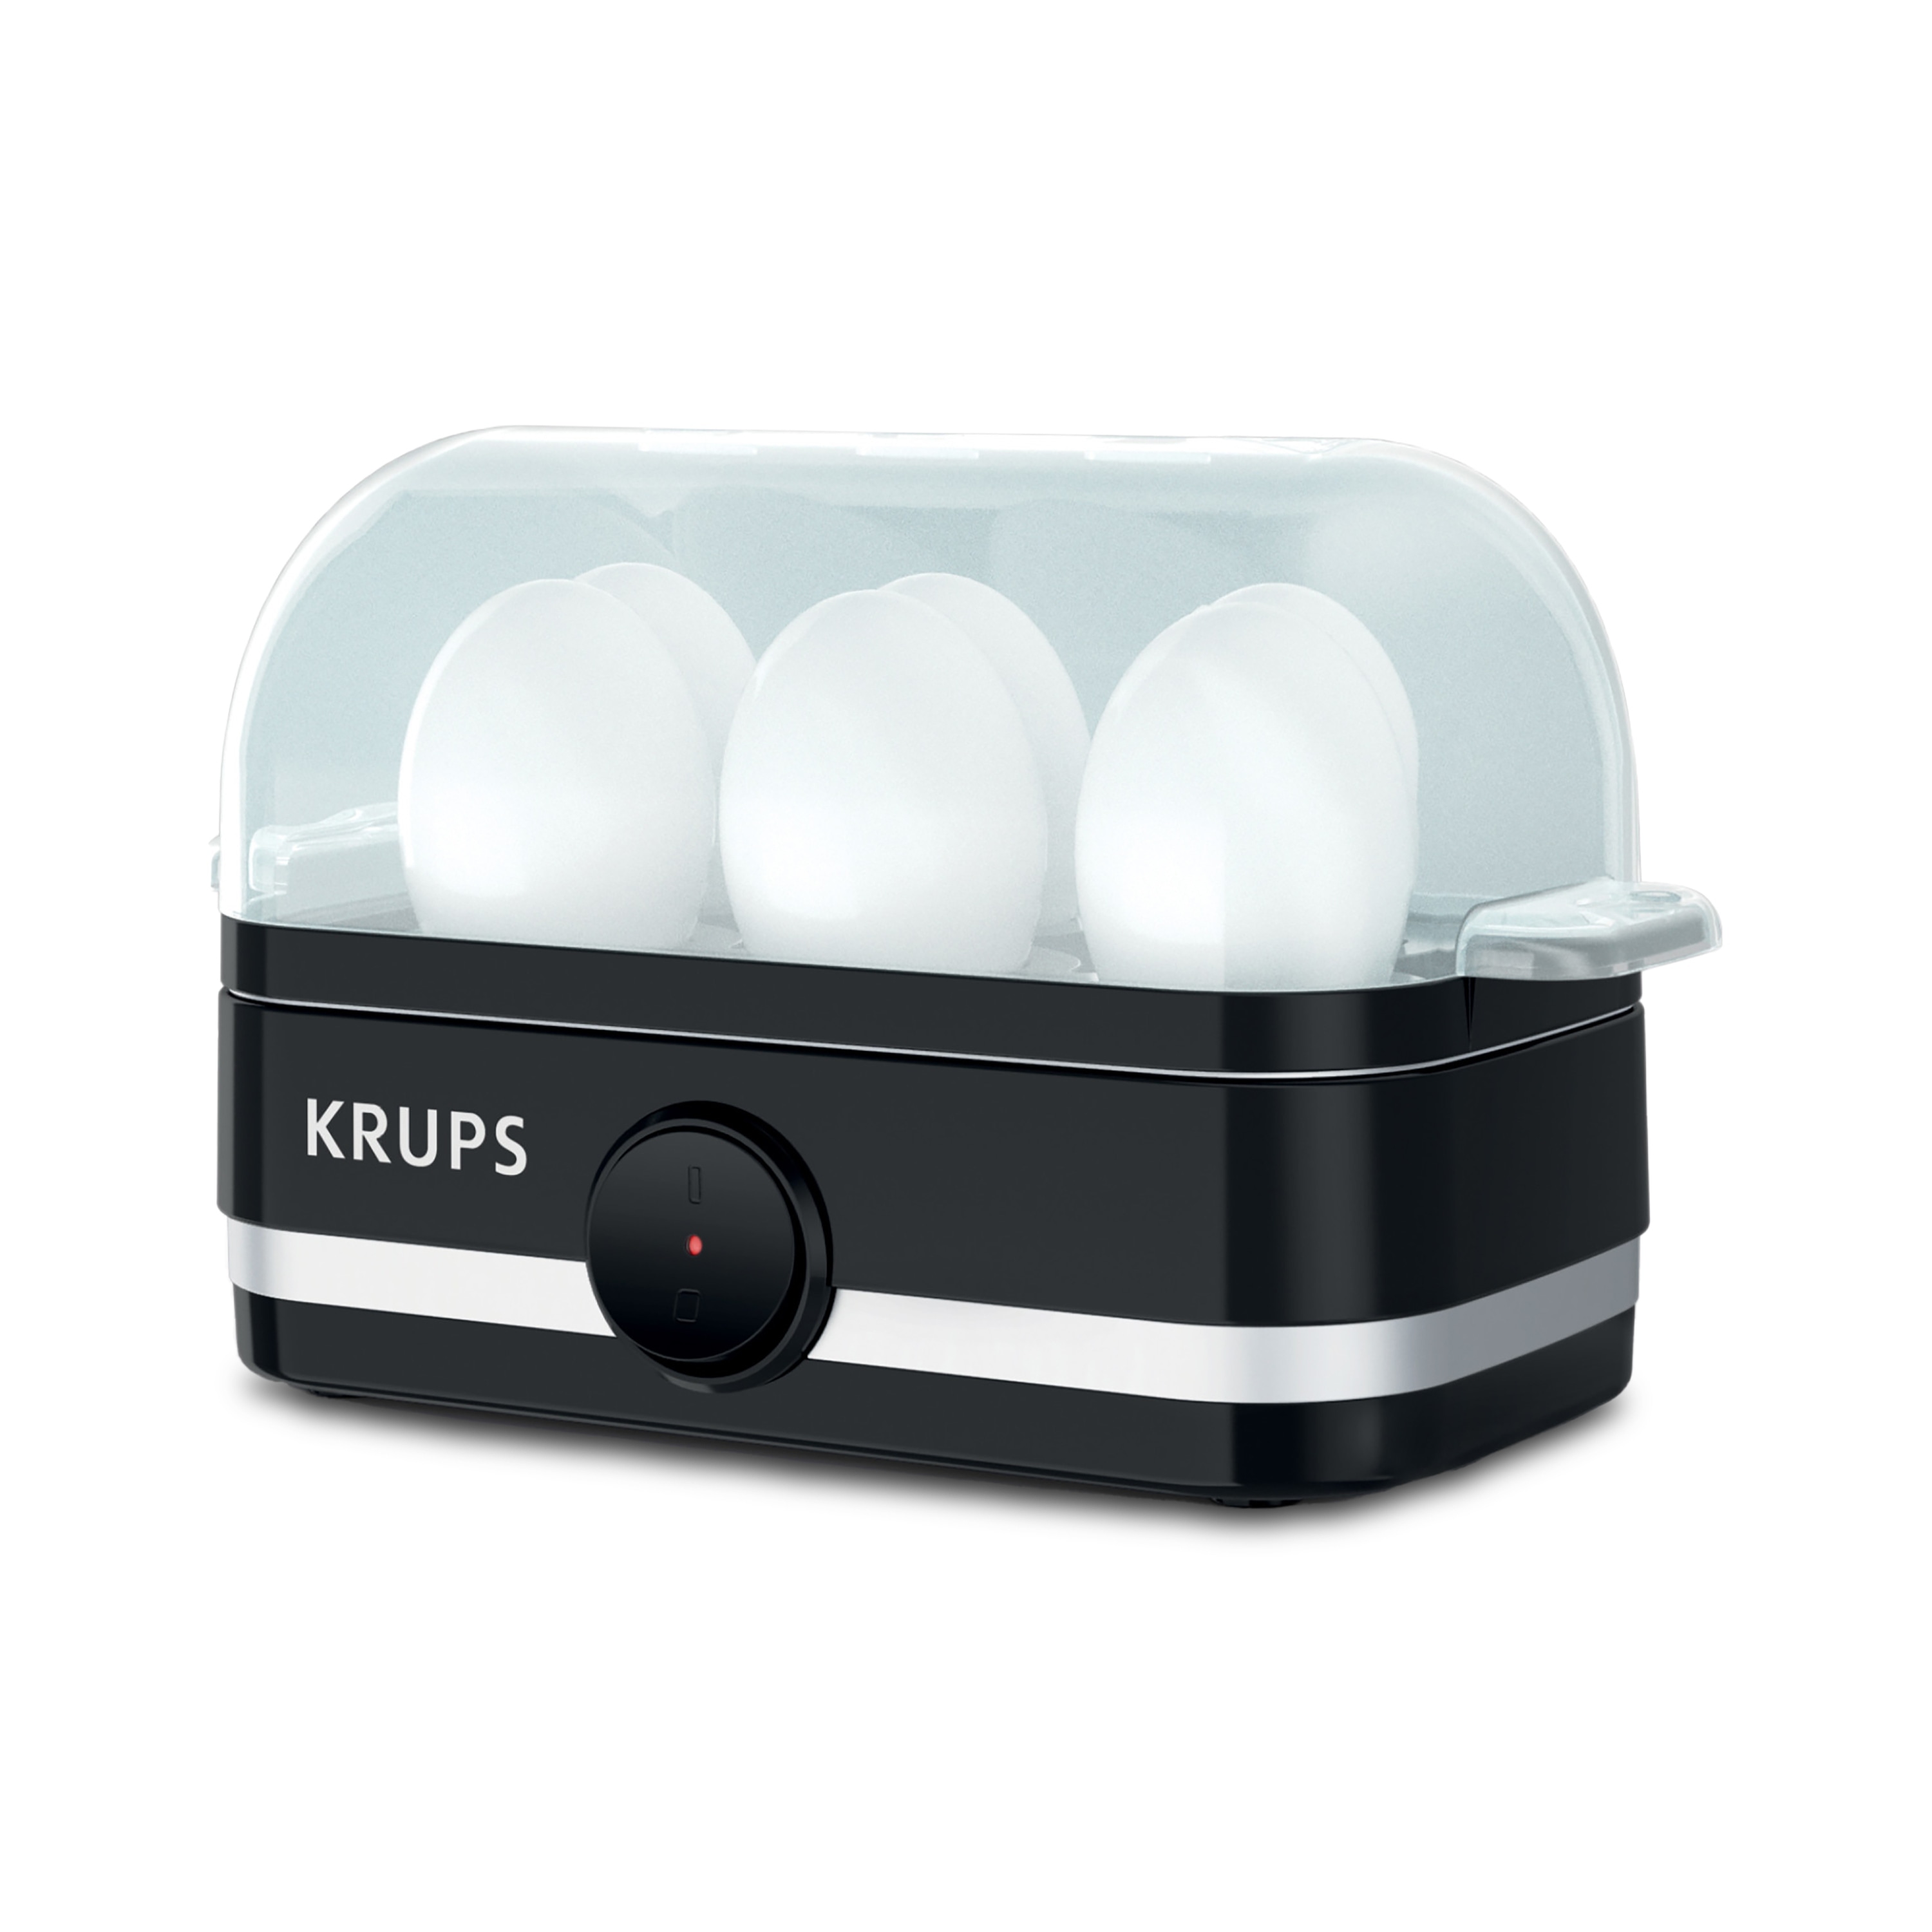 https://ak1.ostkcdn.com/images/products/is/images/direct/80307c0e8710c894d993d9b2cf281ef9041ebba9/KRUPS-KW221850-Simply-Electric-Egg-Cooker-with-Accessories%2C-6-Egg-Capacity.jpg